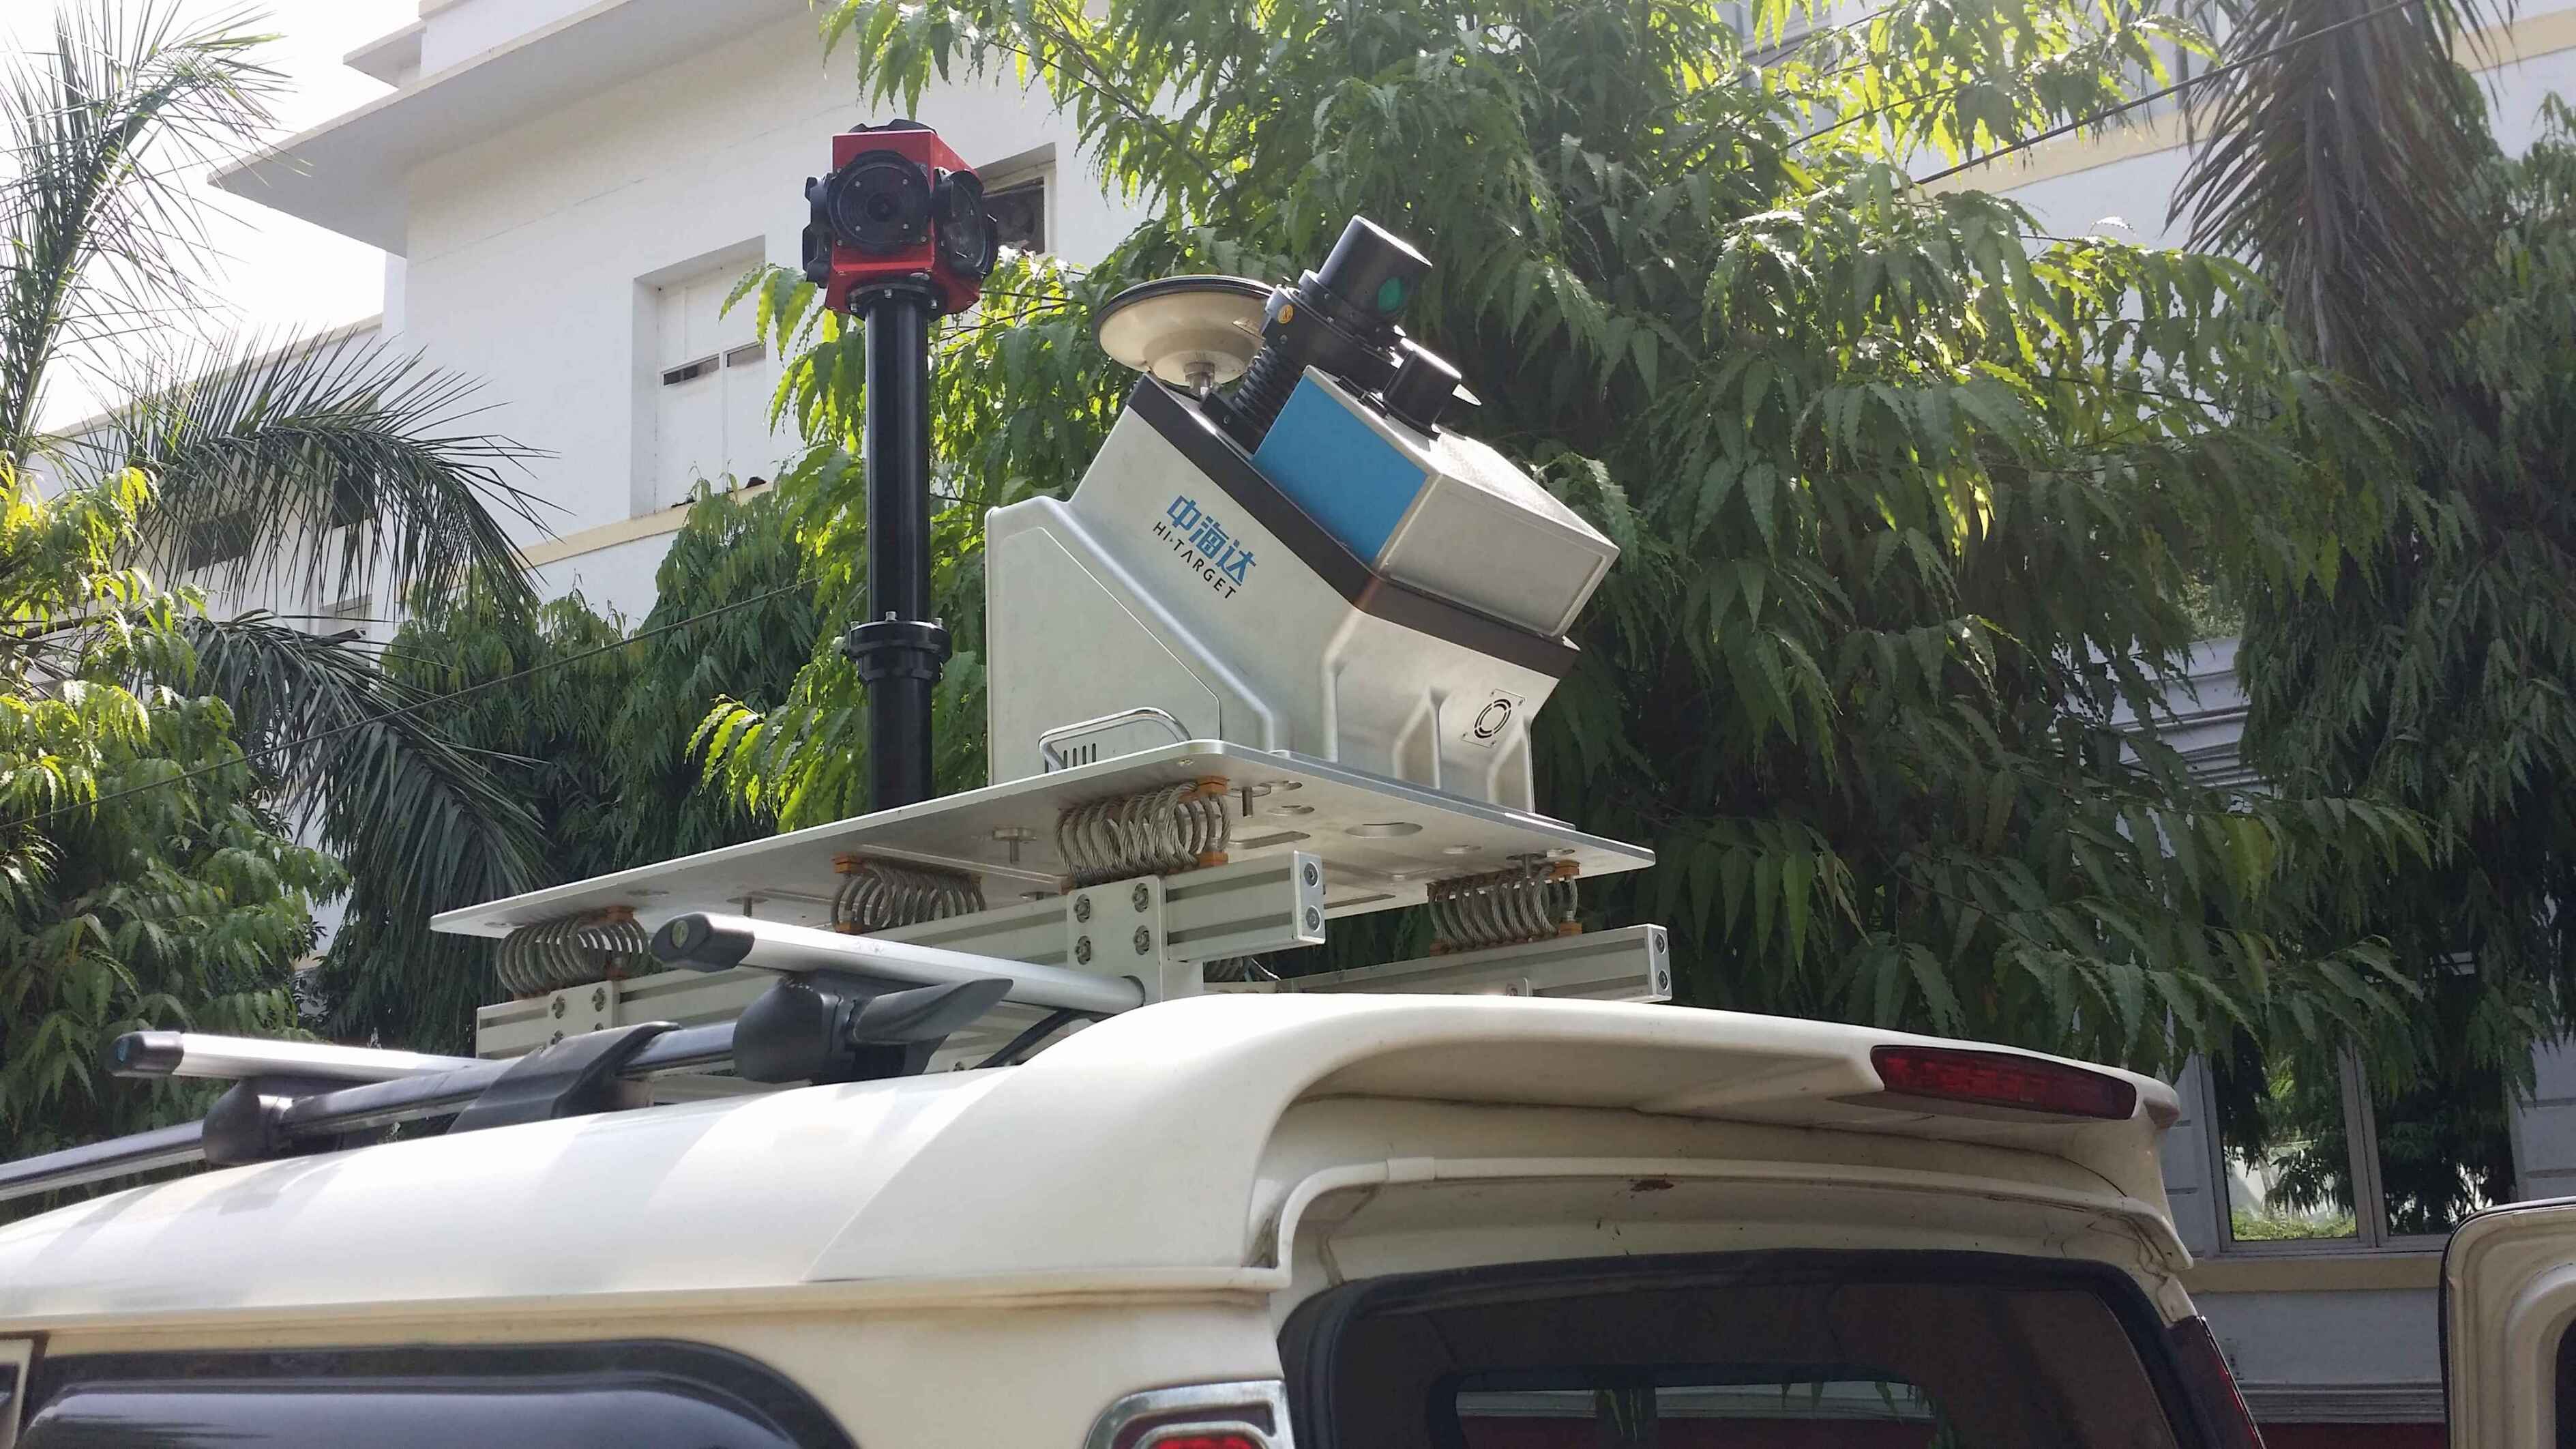 Hi-Target Mobile Mapping System make its first appearance in India